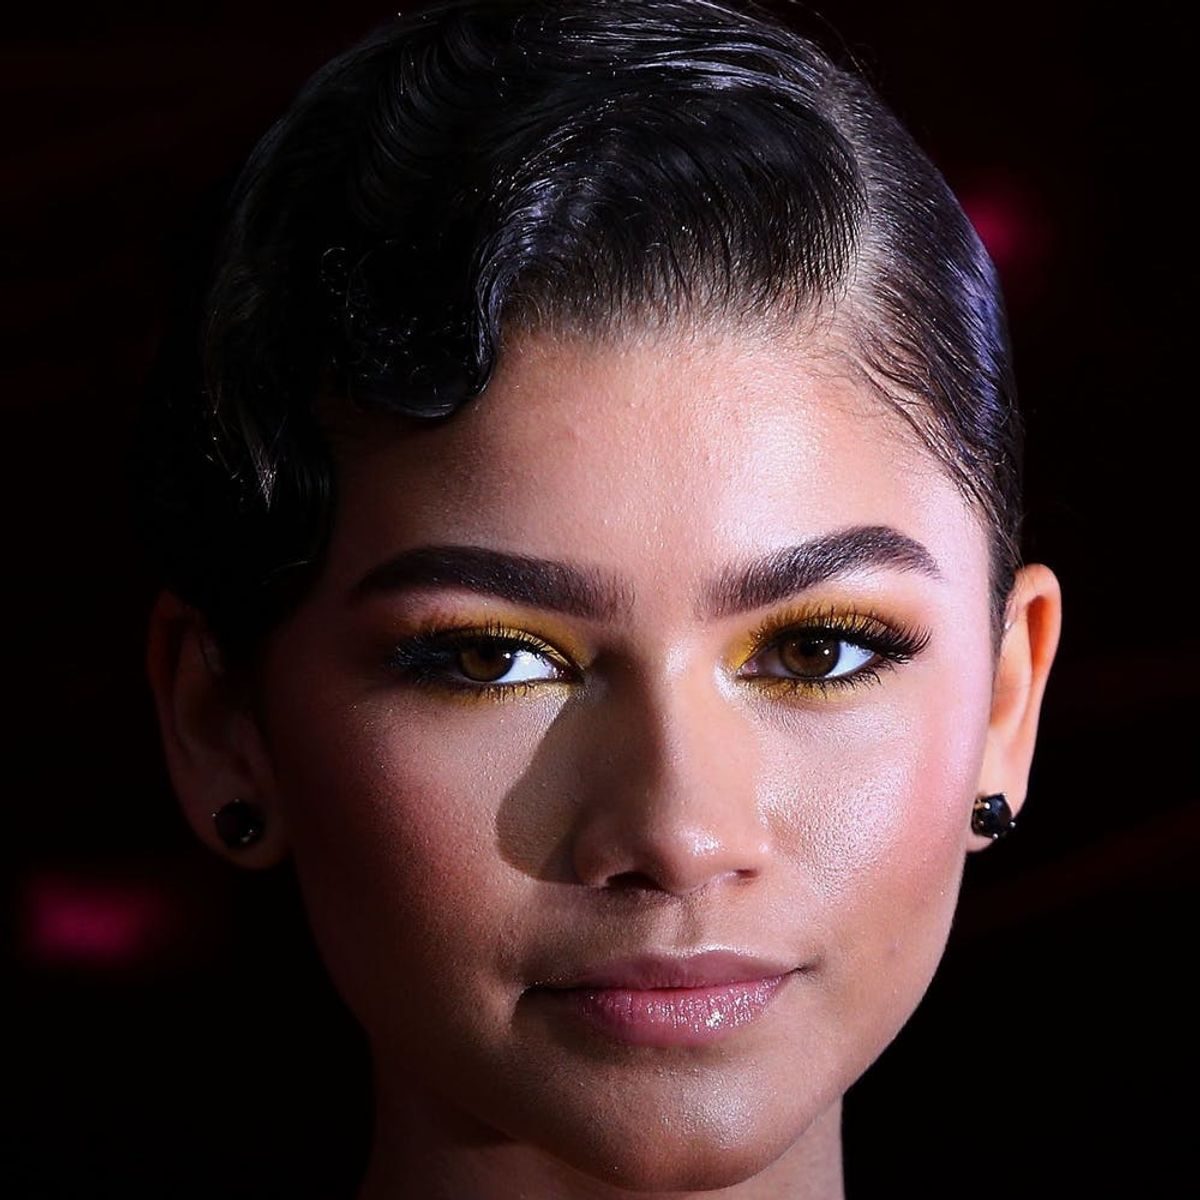 This Butterfly Dress Might Be the Most Extra Look Zendaya Has Ever Worn